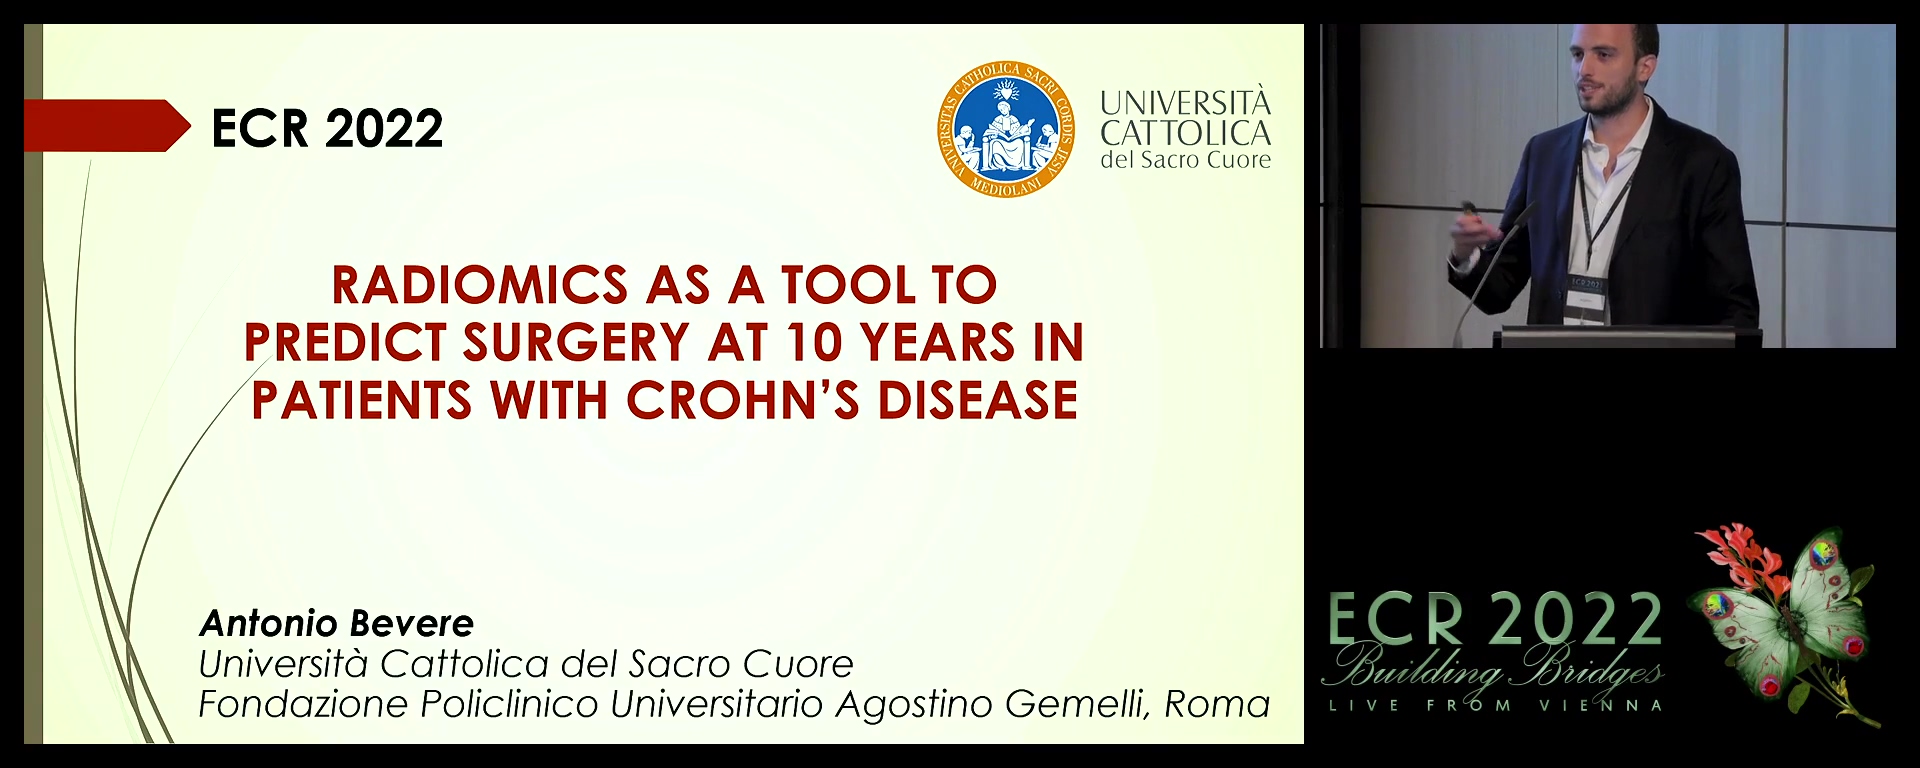 Radiomics as a tool to predict surgery at 10 years in Crohn’s disease - Antonio Bevere, Roma / IT